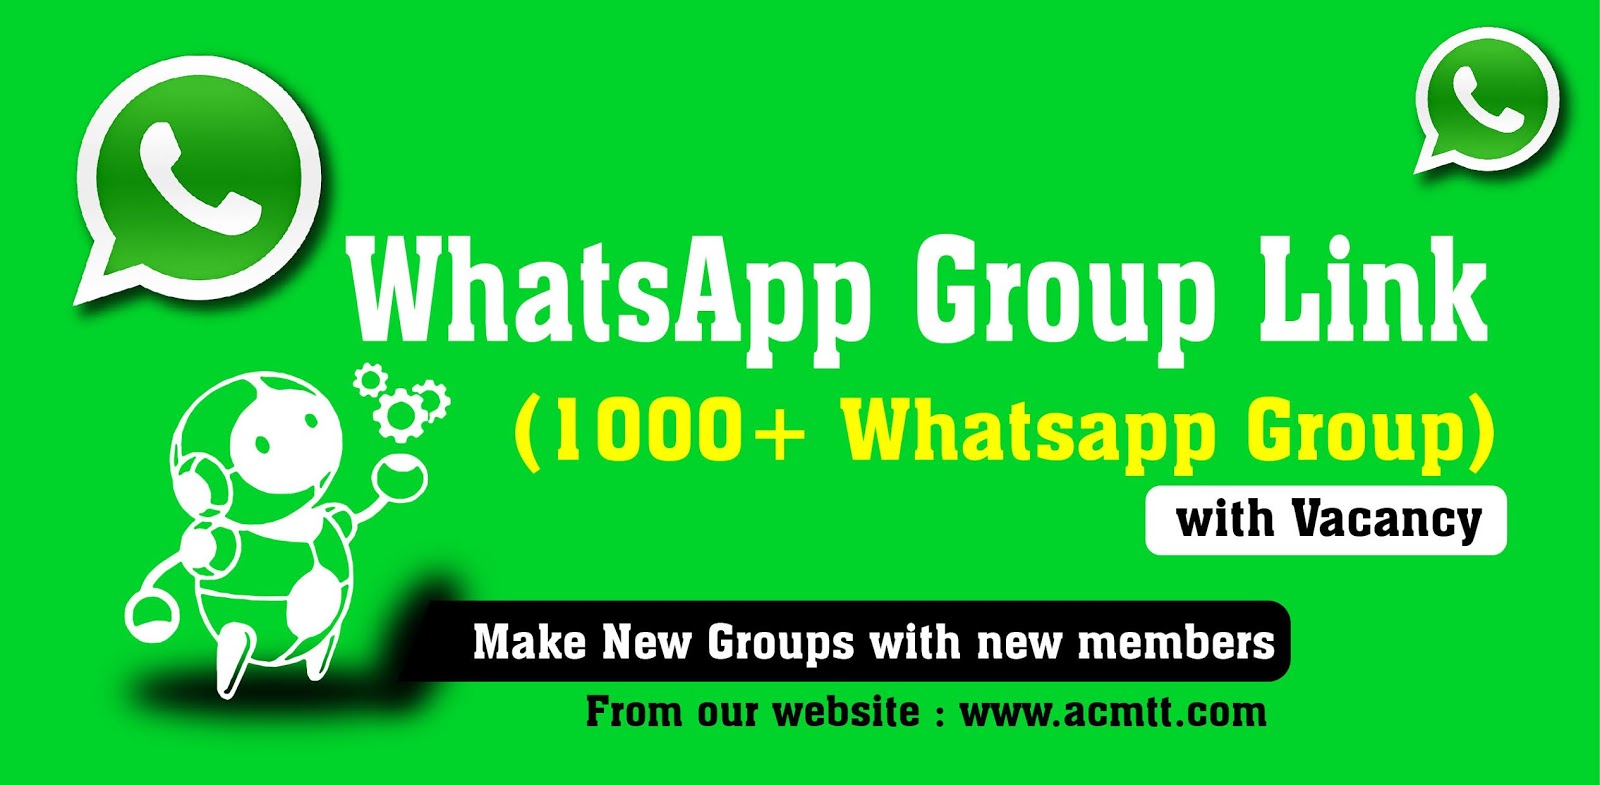 Whatsapp Group Link 1000 Whatsapp Group With Vacancy Computer And Mobile Tips And Tricks